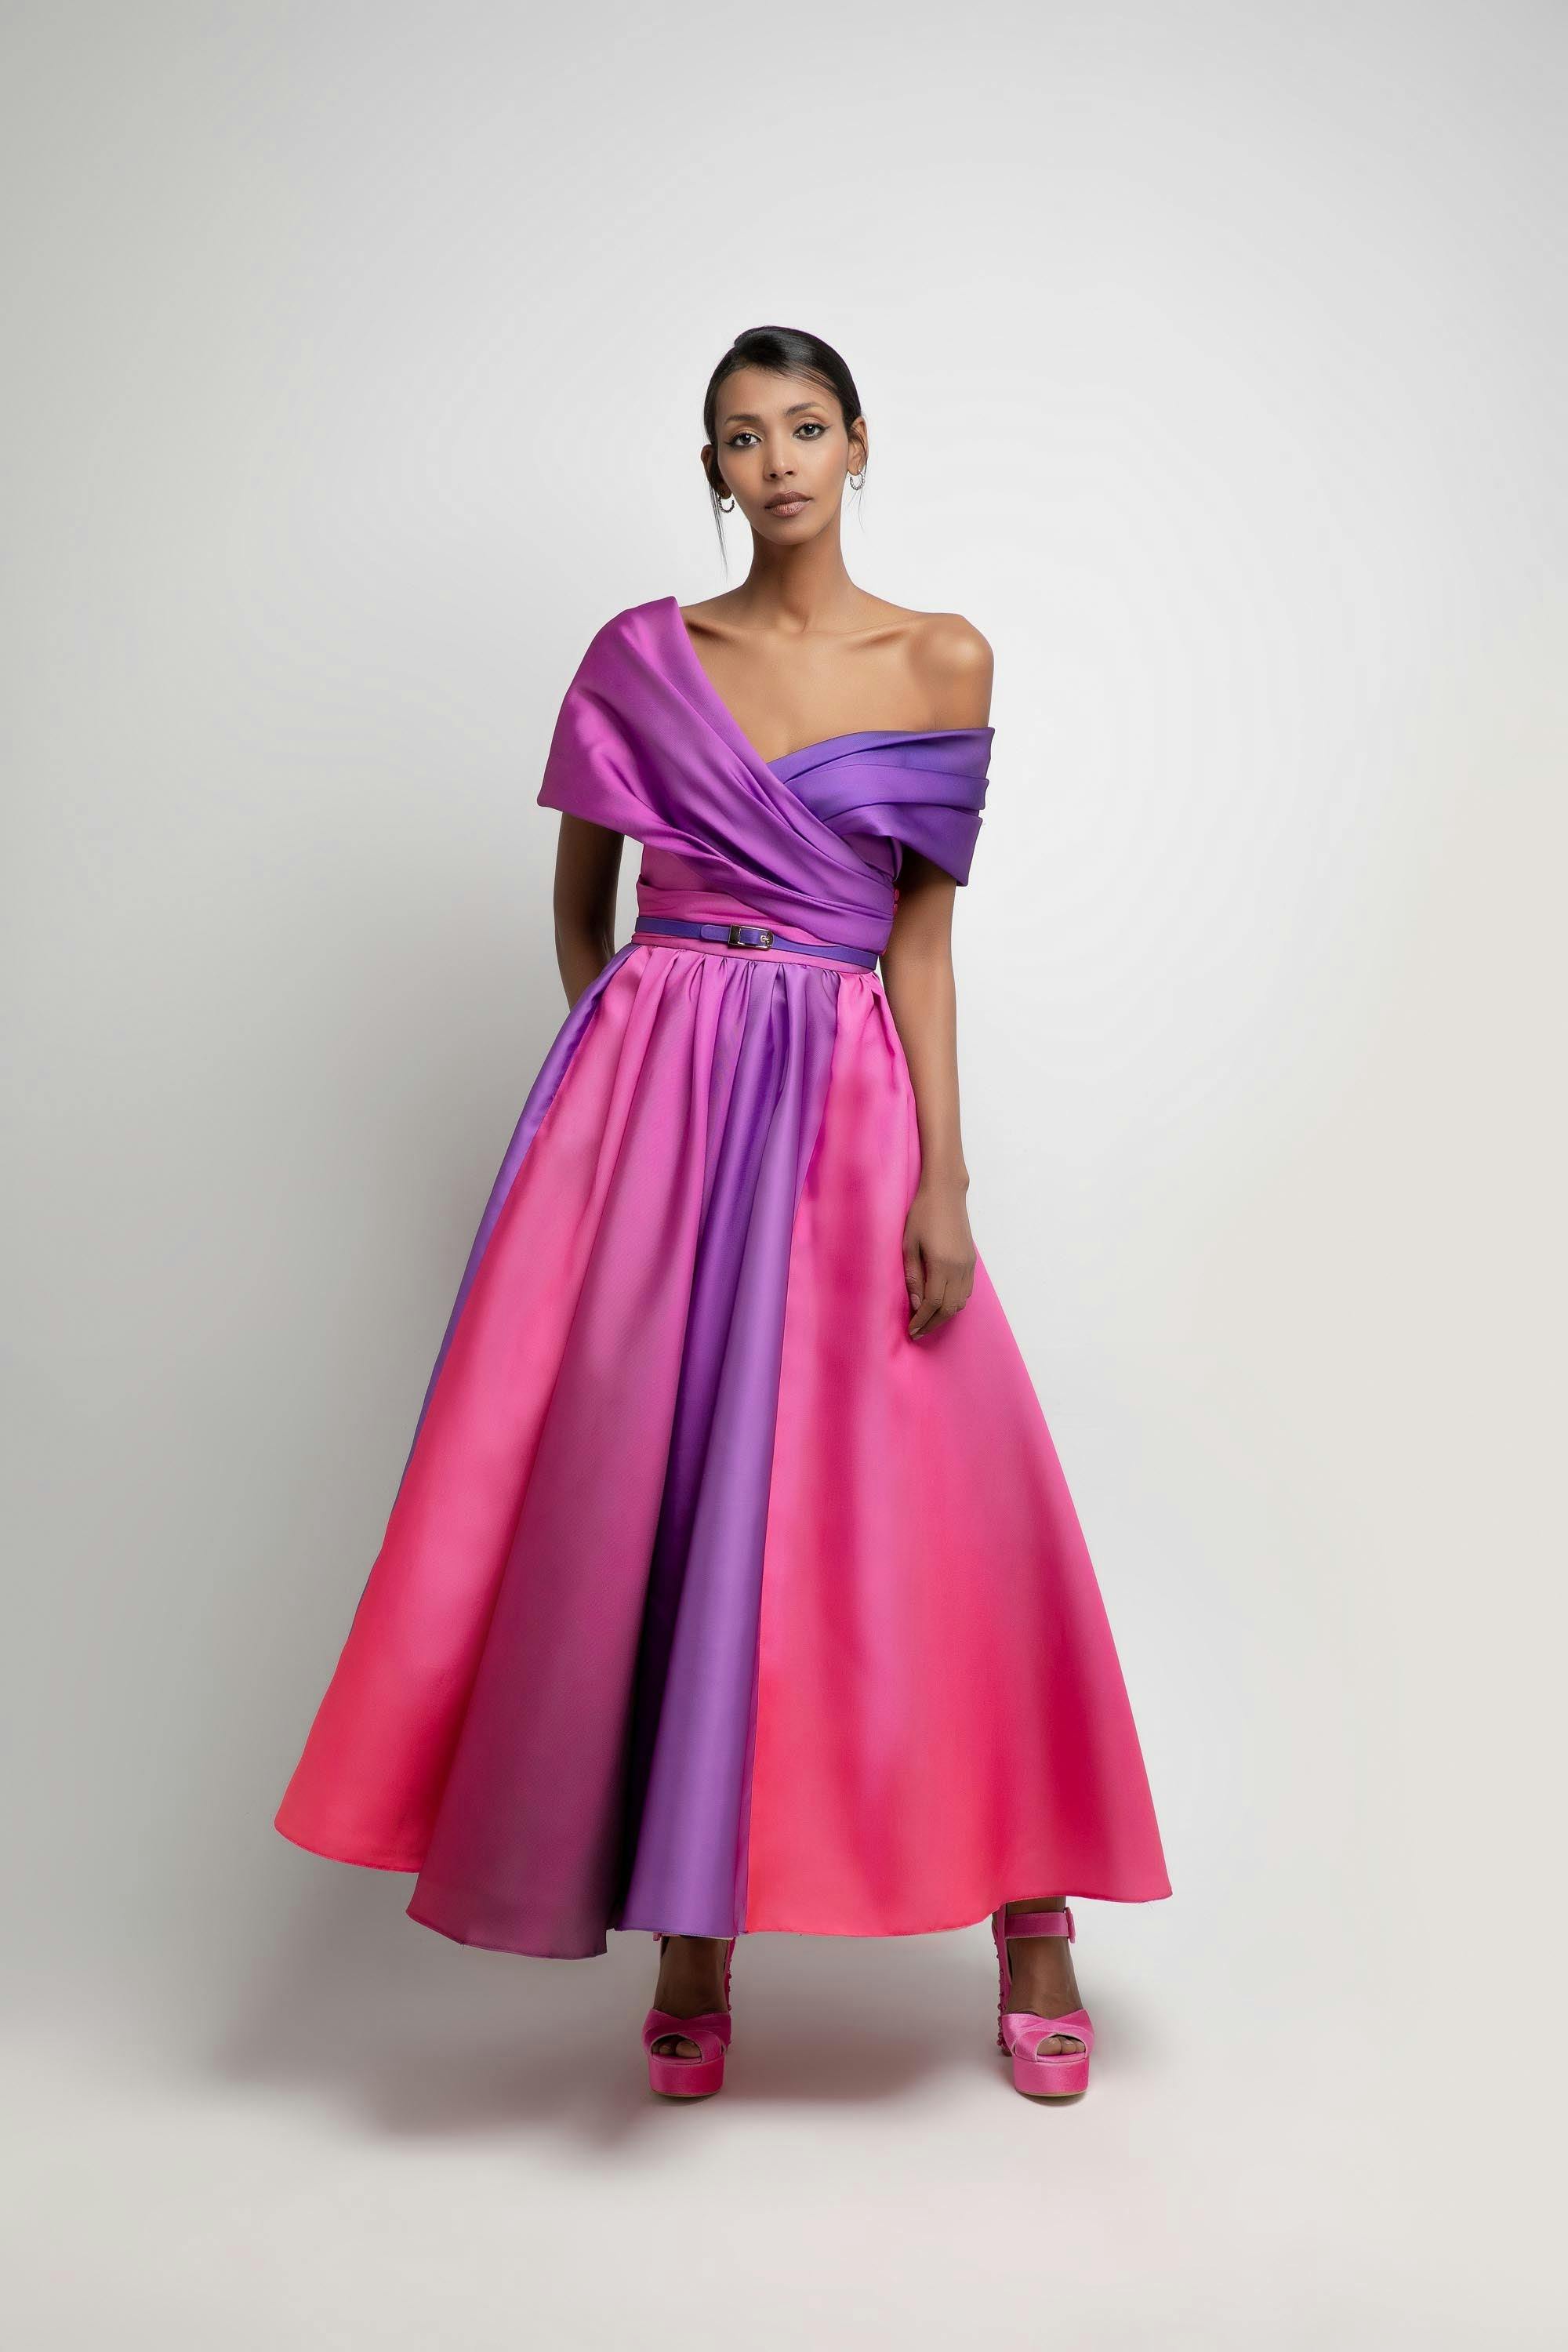 Look 3 - Jean fares couture - JFC-pink and purple one shouldre silk dress